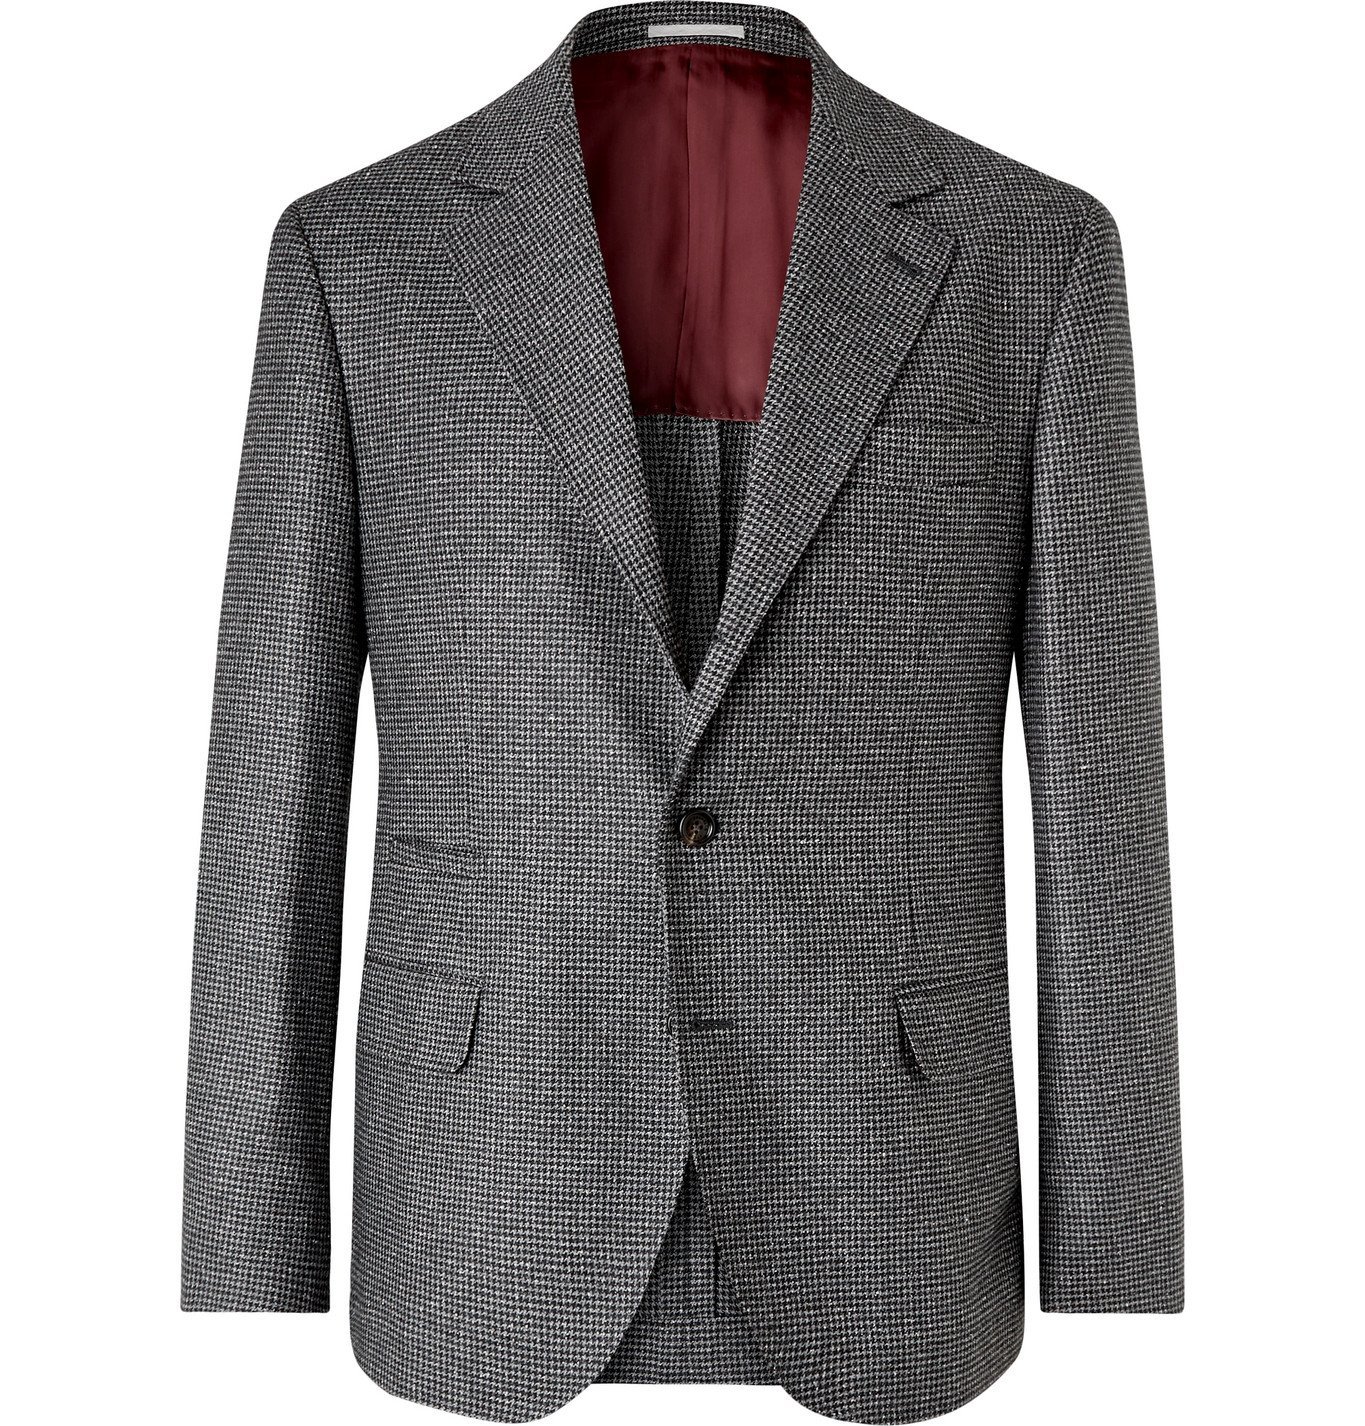 Brunello Cucinelli - Houndstooth Wool and Silk-Blend Suit Jacket - Gray ...